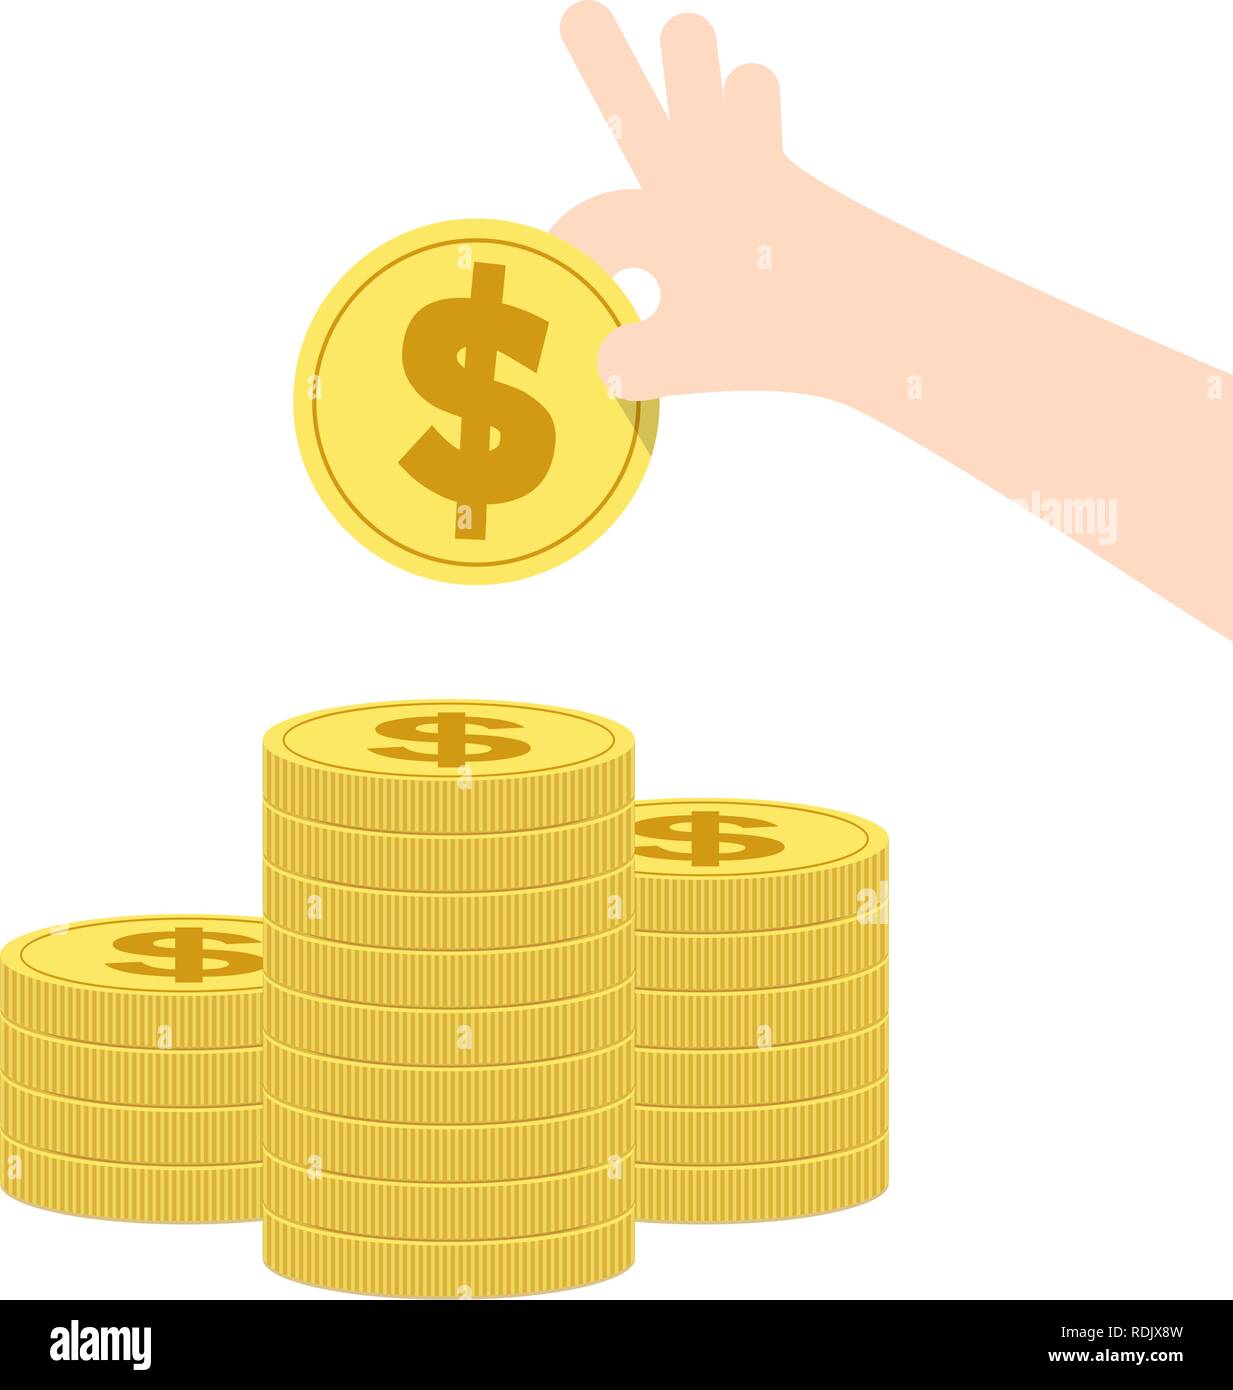 Illustration vector saving a lot of coin stack. Finance Concept. Stock Vector